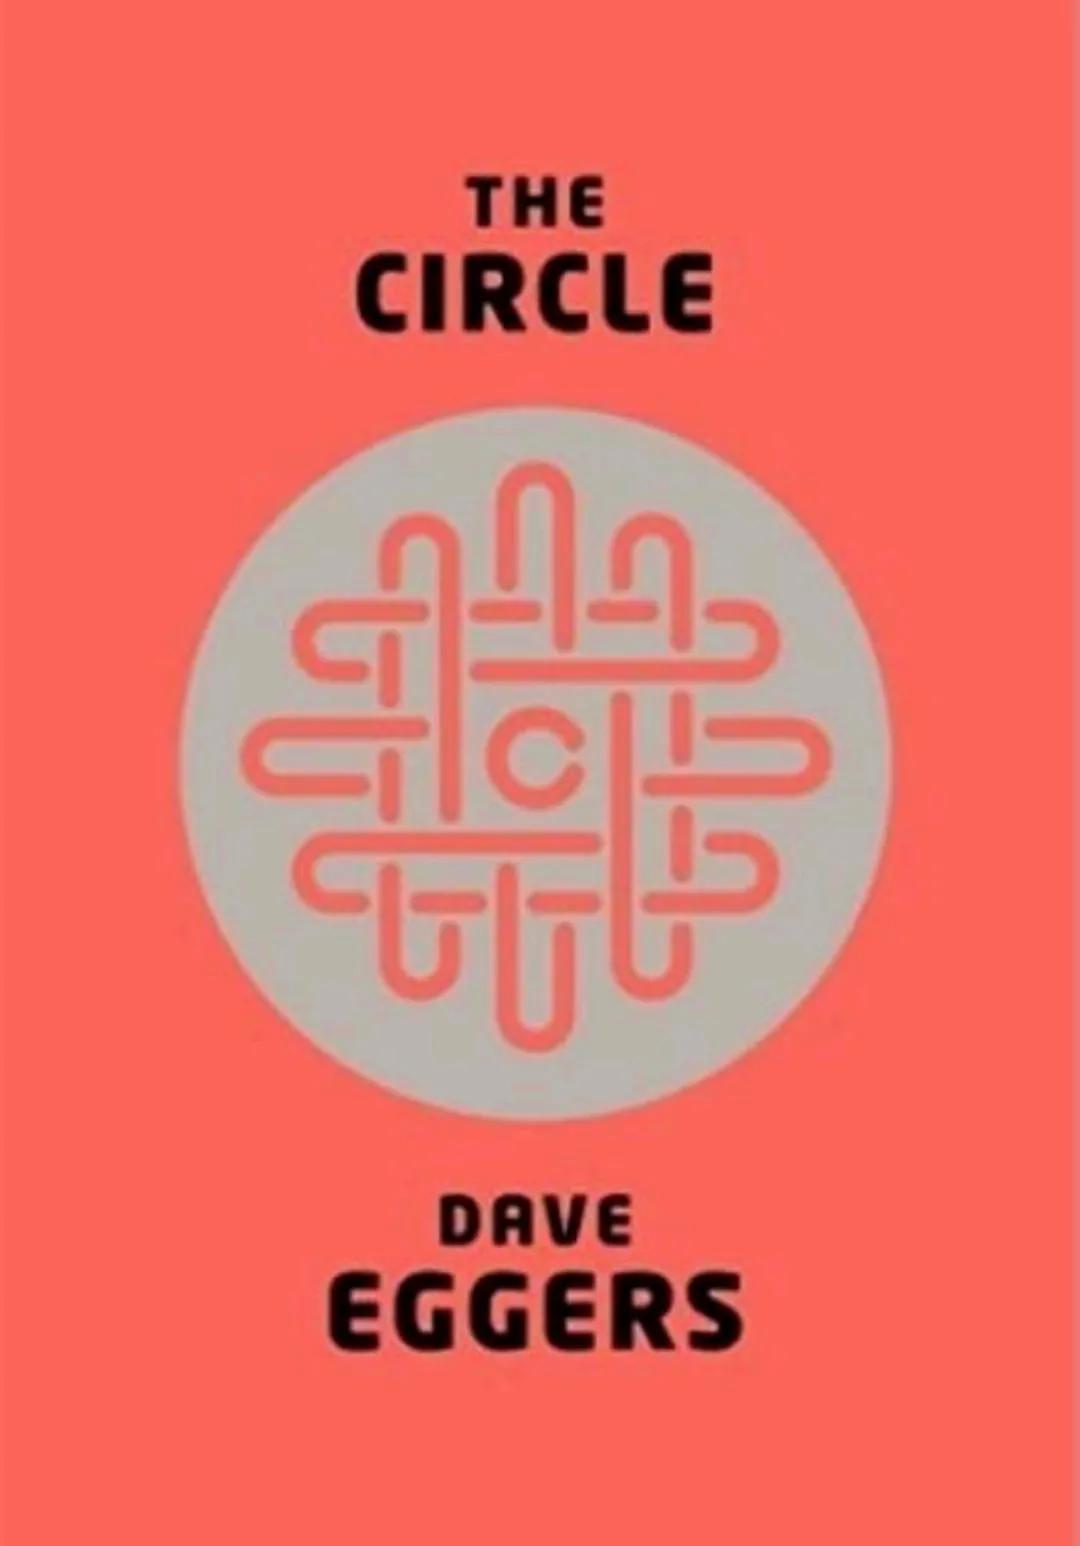 THE
CIRCLE
ՉԵՆ
DAVE
EGGERS STORYLINE:
The circle" -> company like Google or yahoo! nowadays, which wants to create total transparency. The k